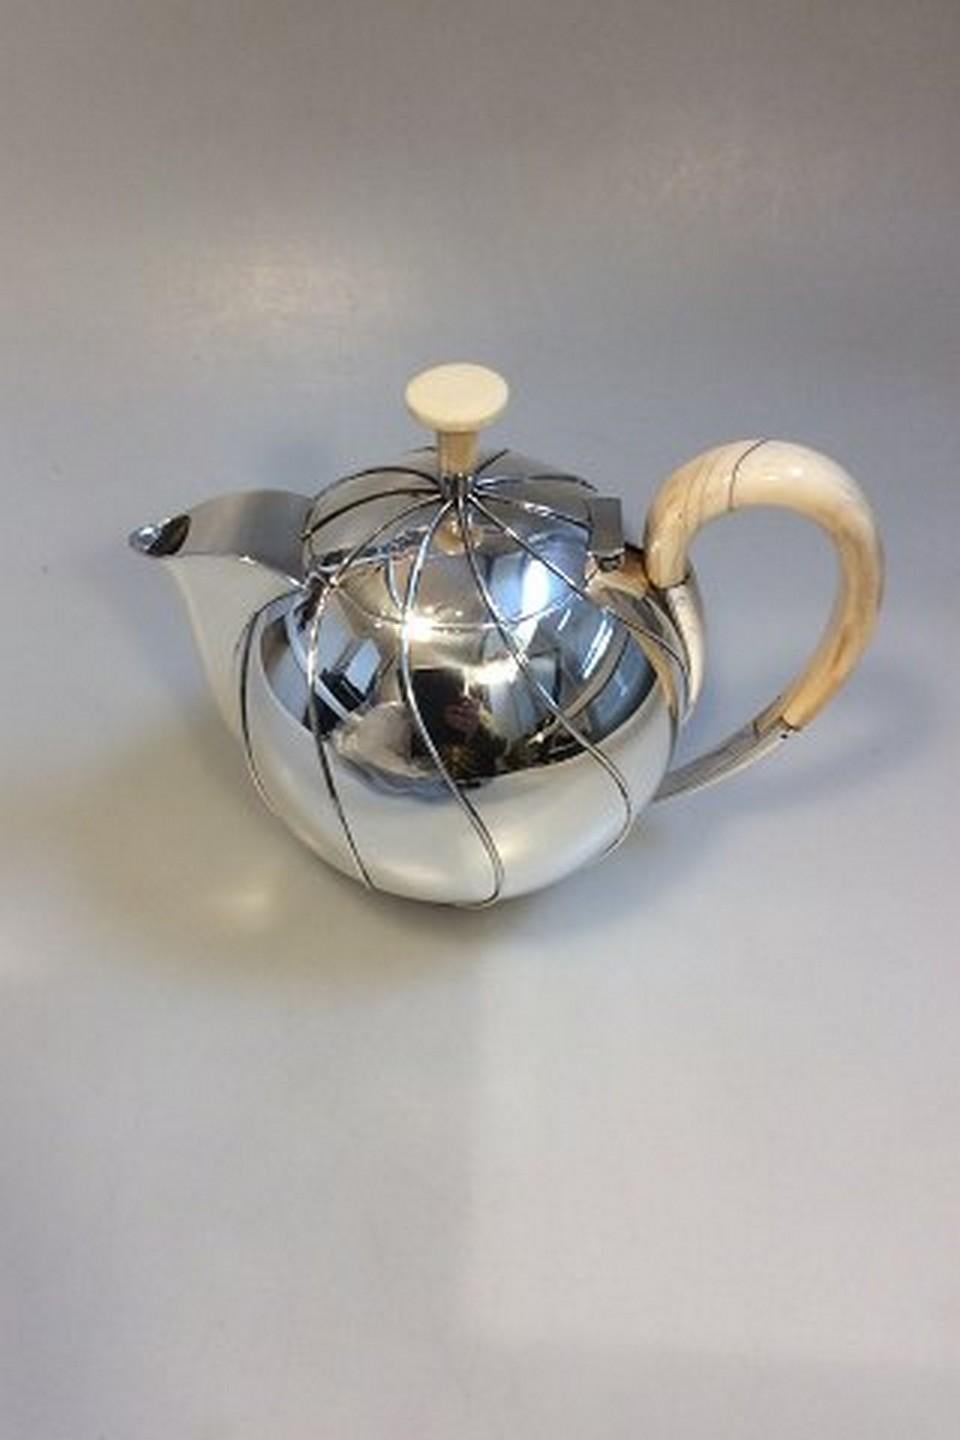 Hingelberg sterling silver tea pot designed by Svend Weihrauch.

Measures 17cm high and 20,5cm from handle to spout. (6.69